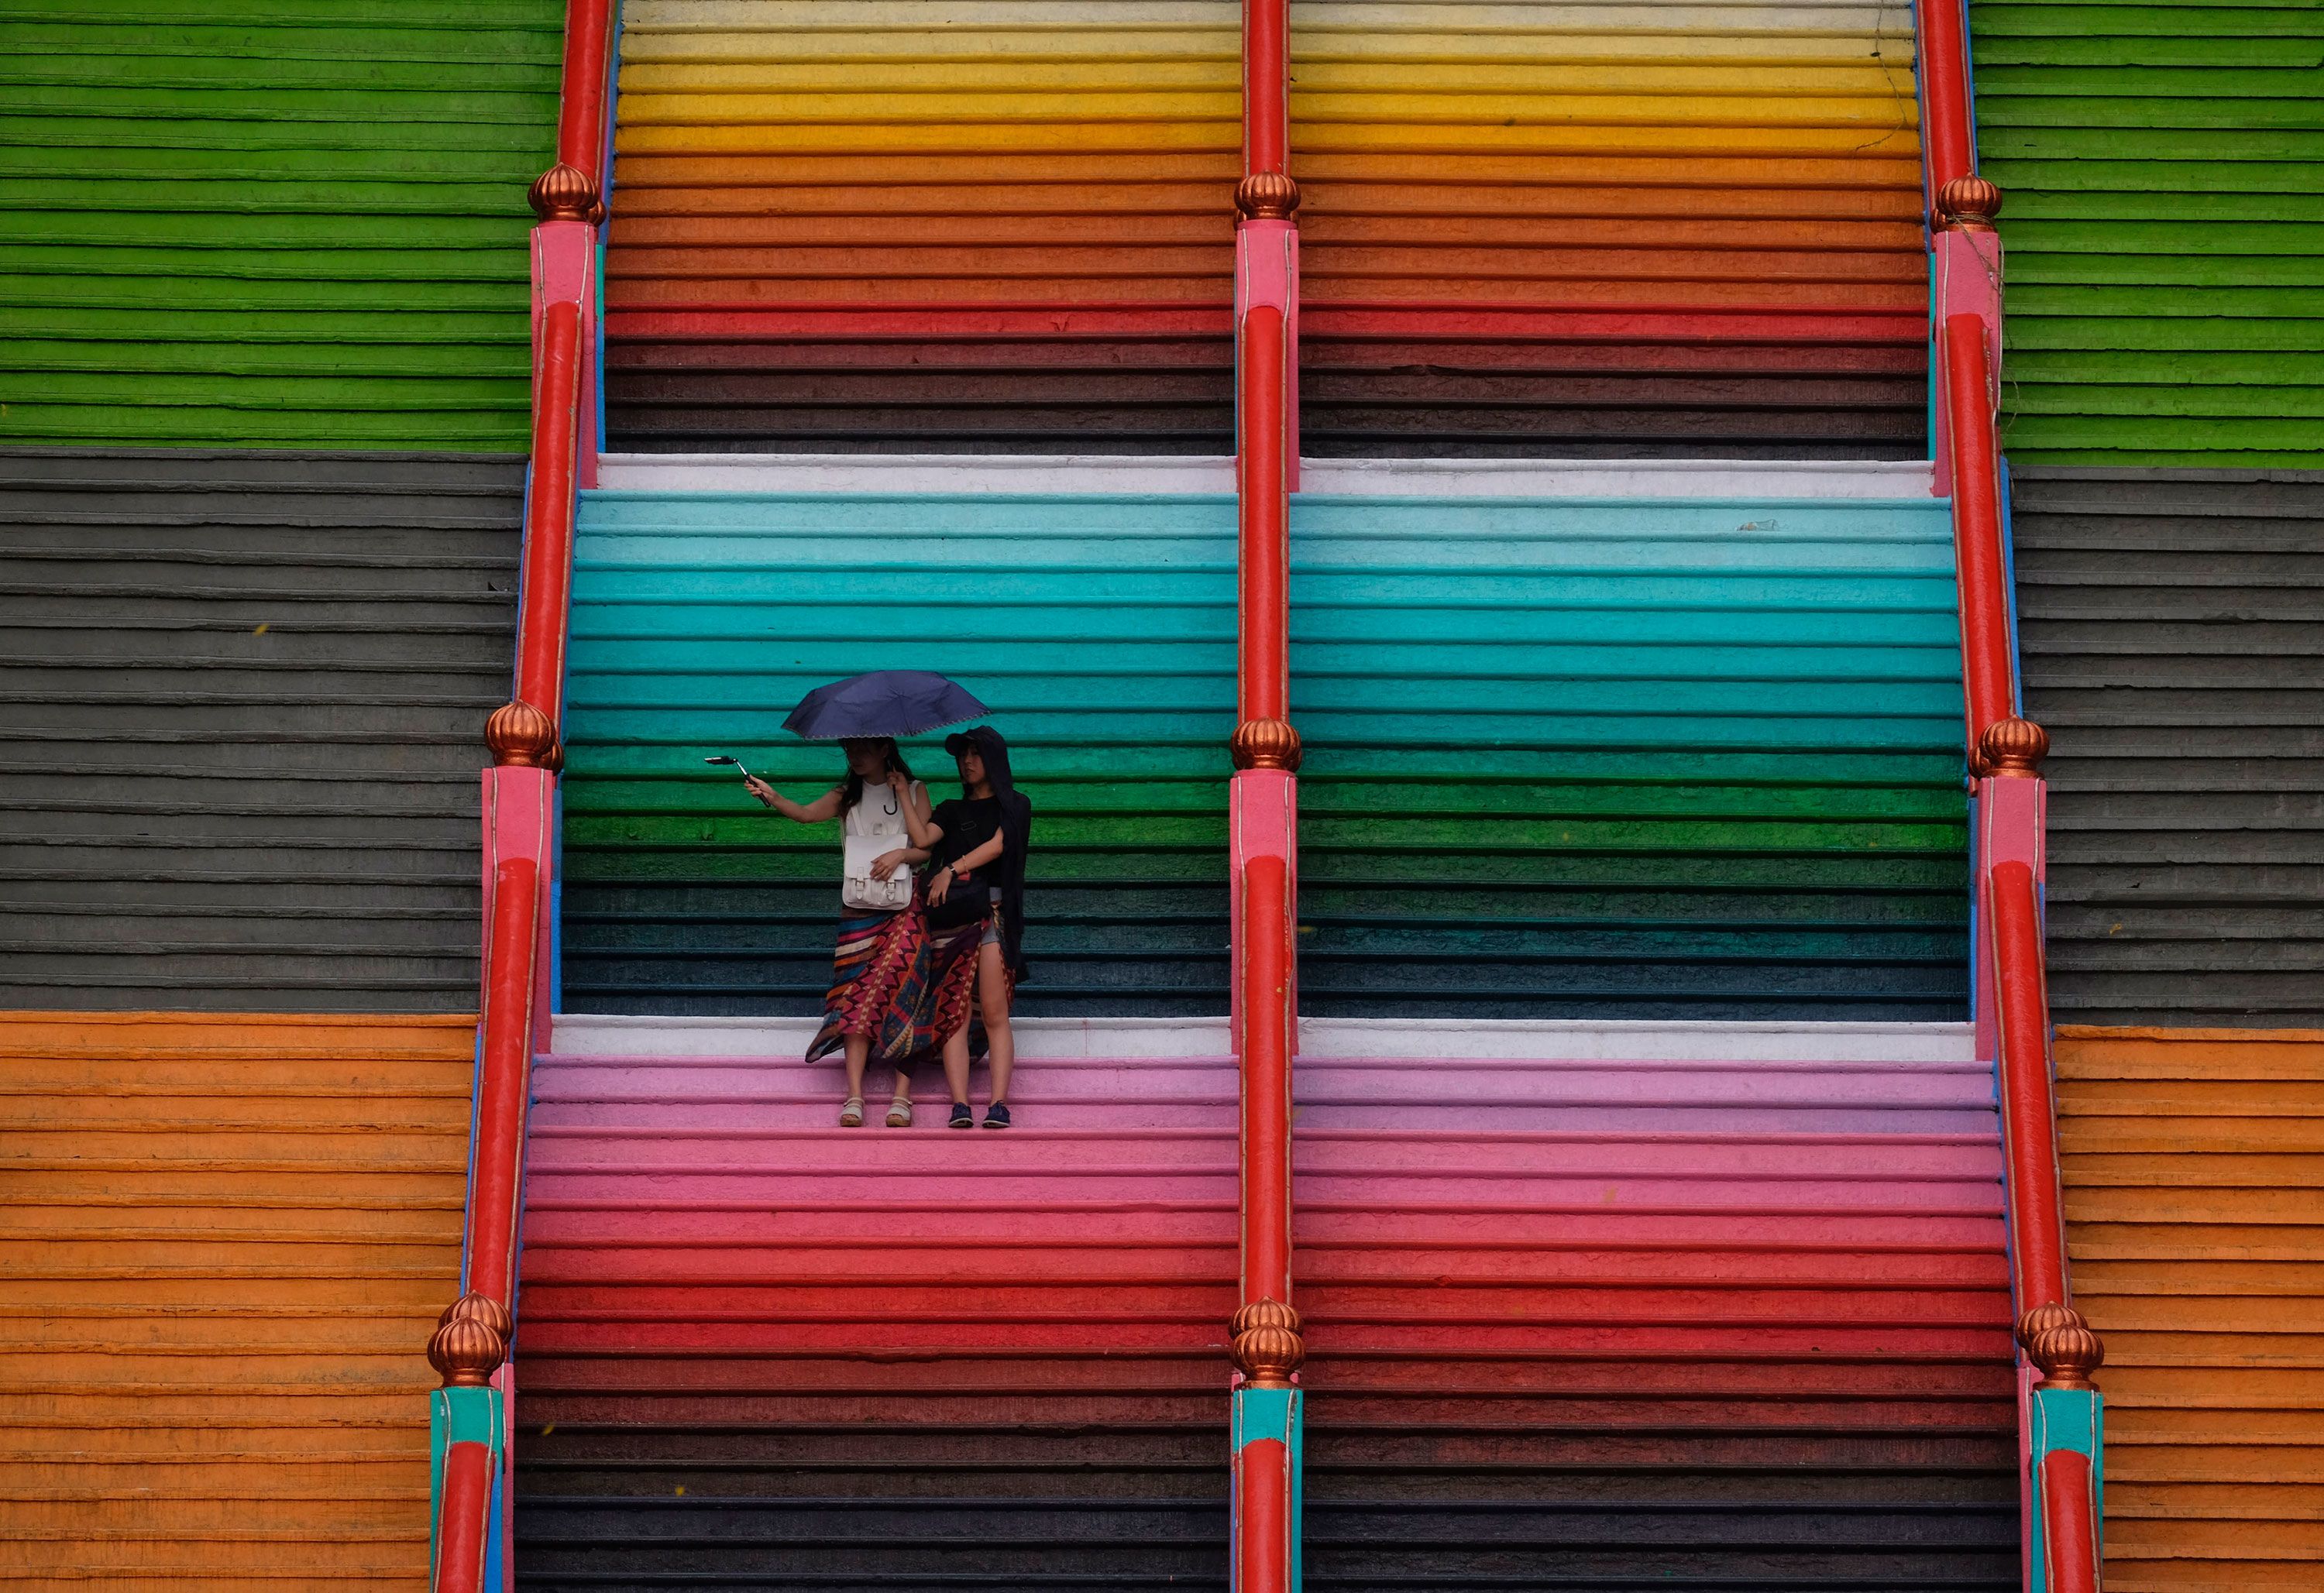 BATU CAVES, MALAYSIA - SEPTEMBER 01: Visitors are seen take their picture on the 272-step stairs leading up to the Sri Subramaniar Swamy temple are painted with bright colors  on September 1, 2018 in Batu Caves, Malaysia. The Sri Subramaniar Swamy Temple are painted to resamble a rainbow and also given a colourfull new look for temple, a rejuvenations process which is performed once 12 years also is a part of Hindu ritual for their beleiver. (Photo by Mohd Samsul Mohd Said/Getty Images)